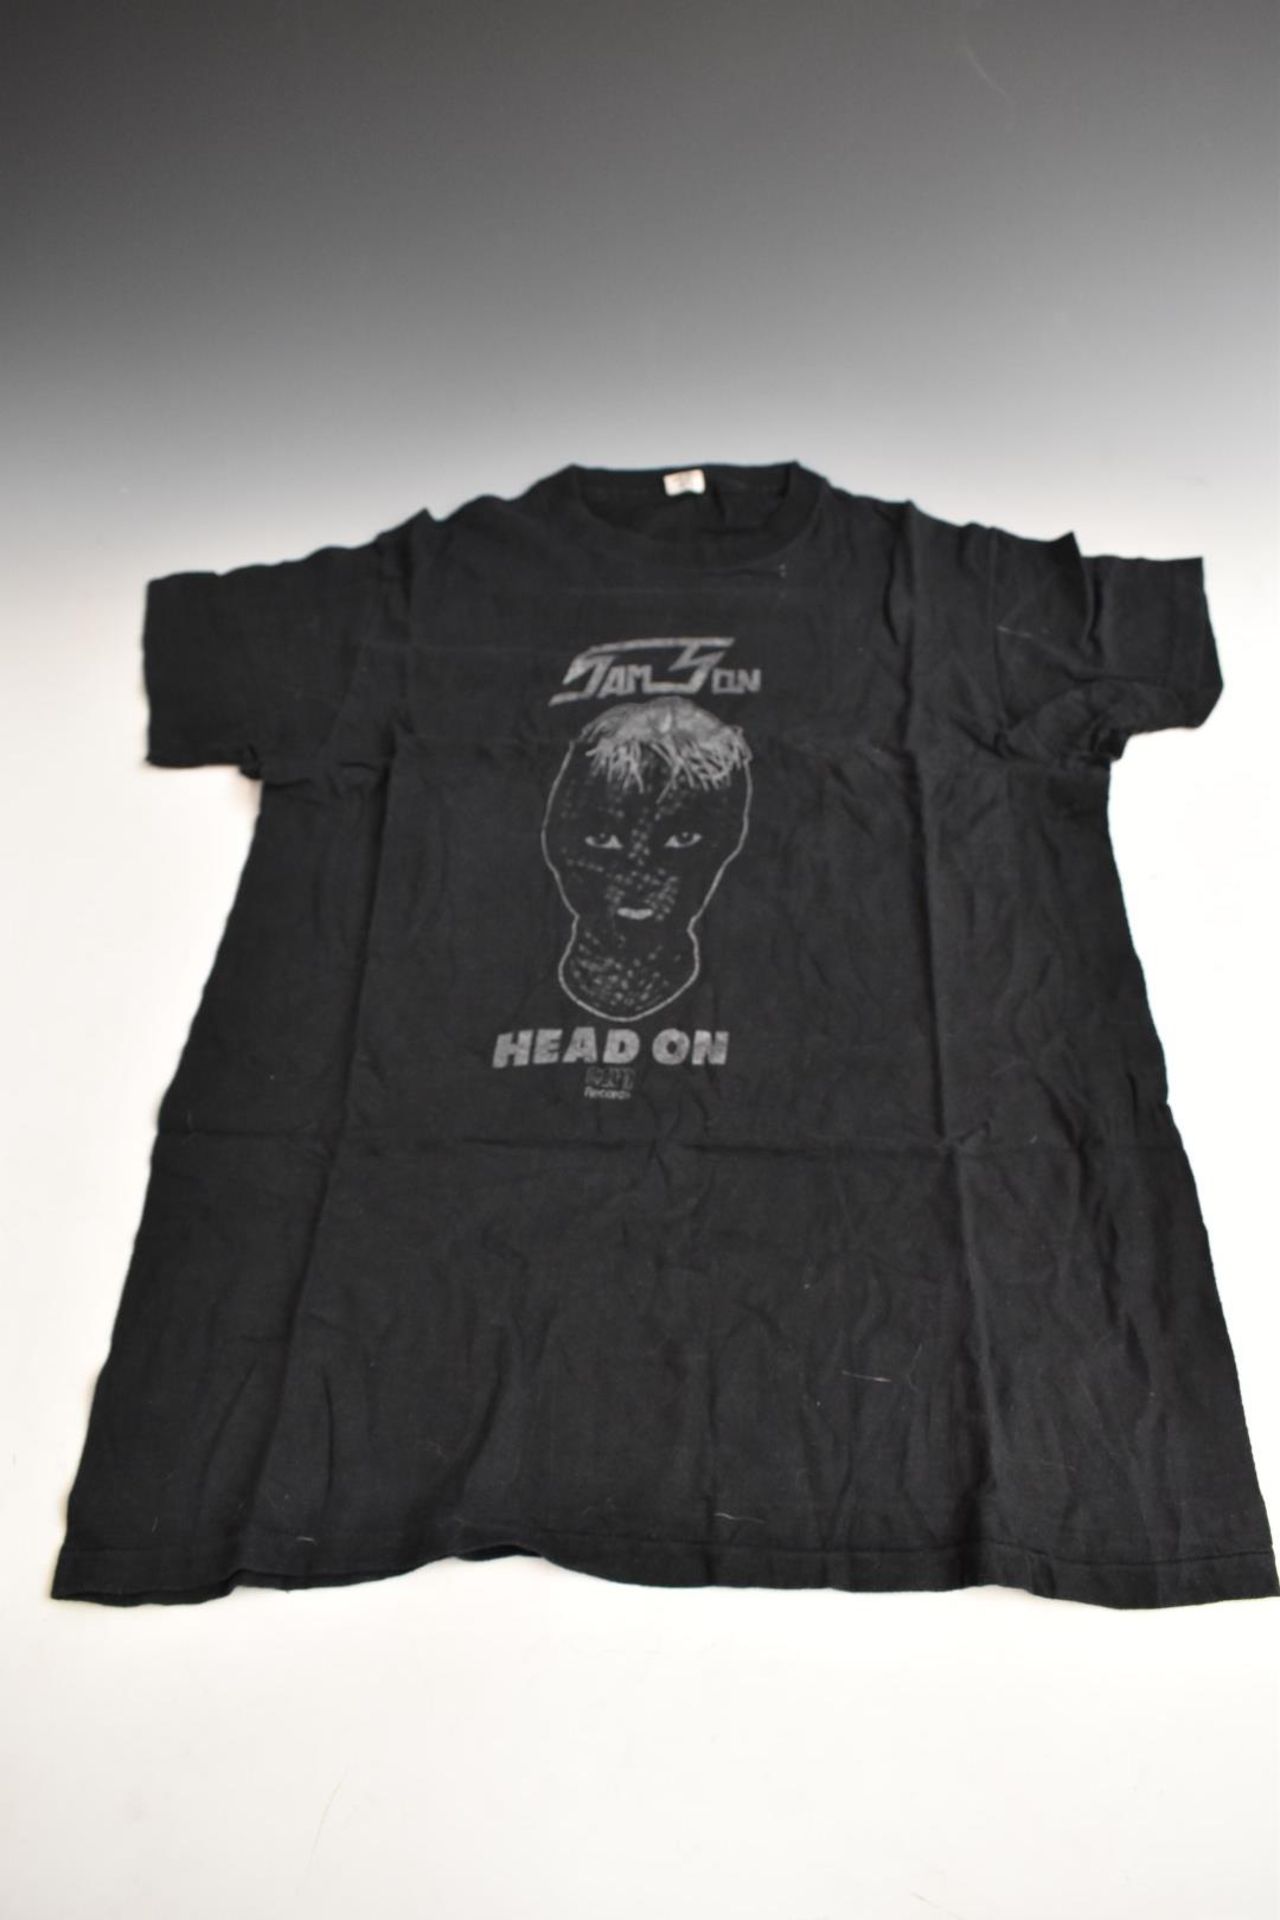 Twenty band T-shirts, to include Iron Maiden, Crobar, The Rods, Ramones, UK Subs and Stiff Records - Image 4 of 7